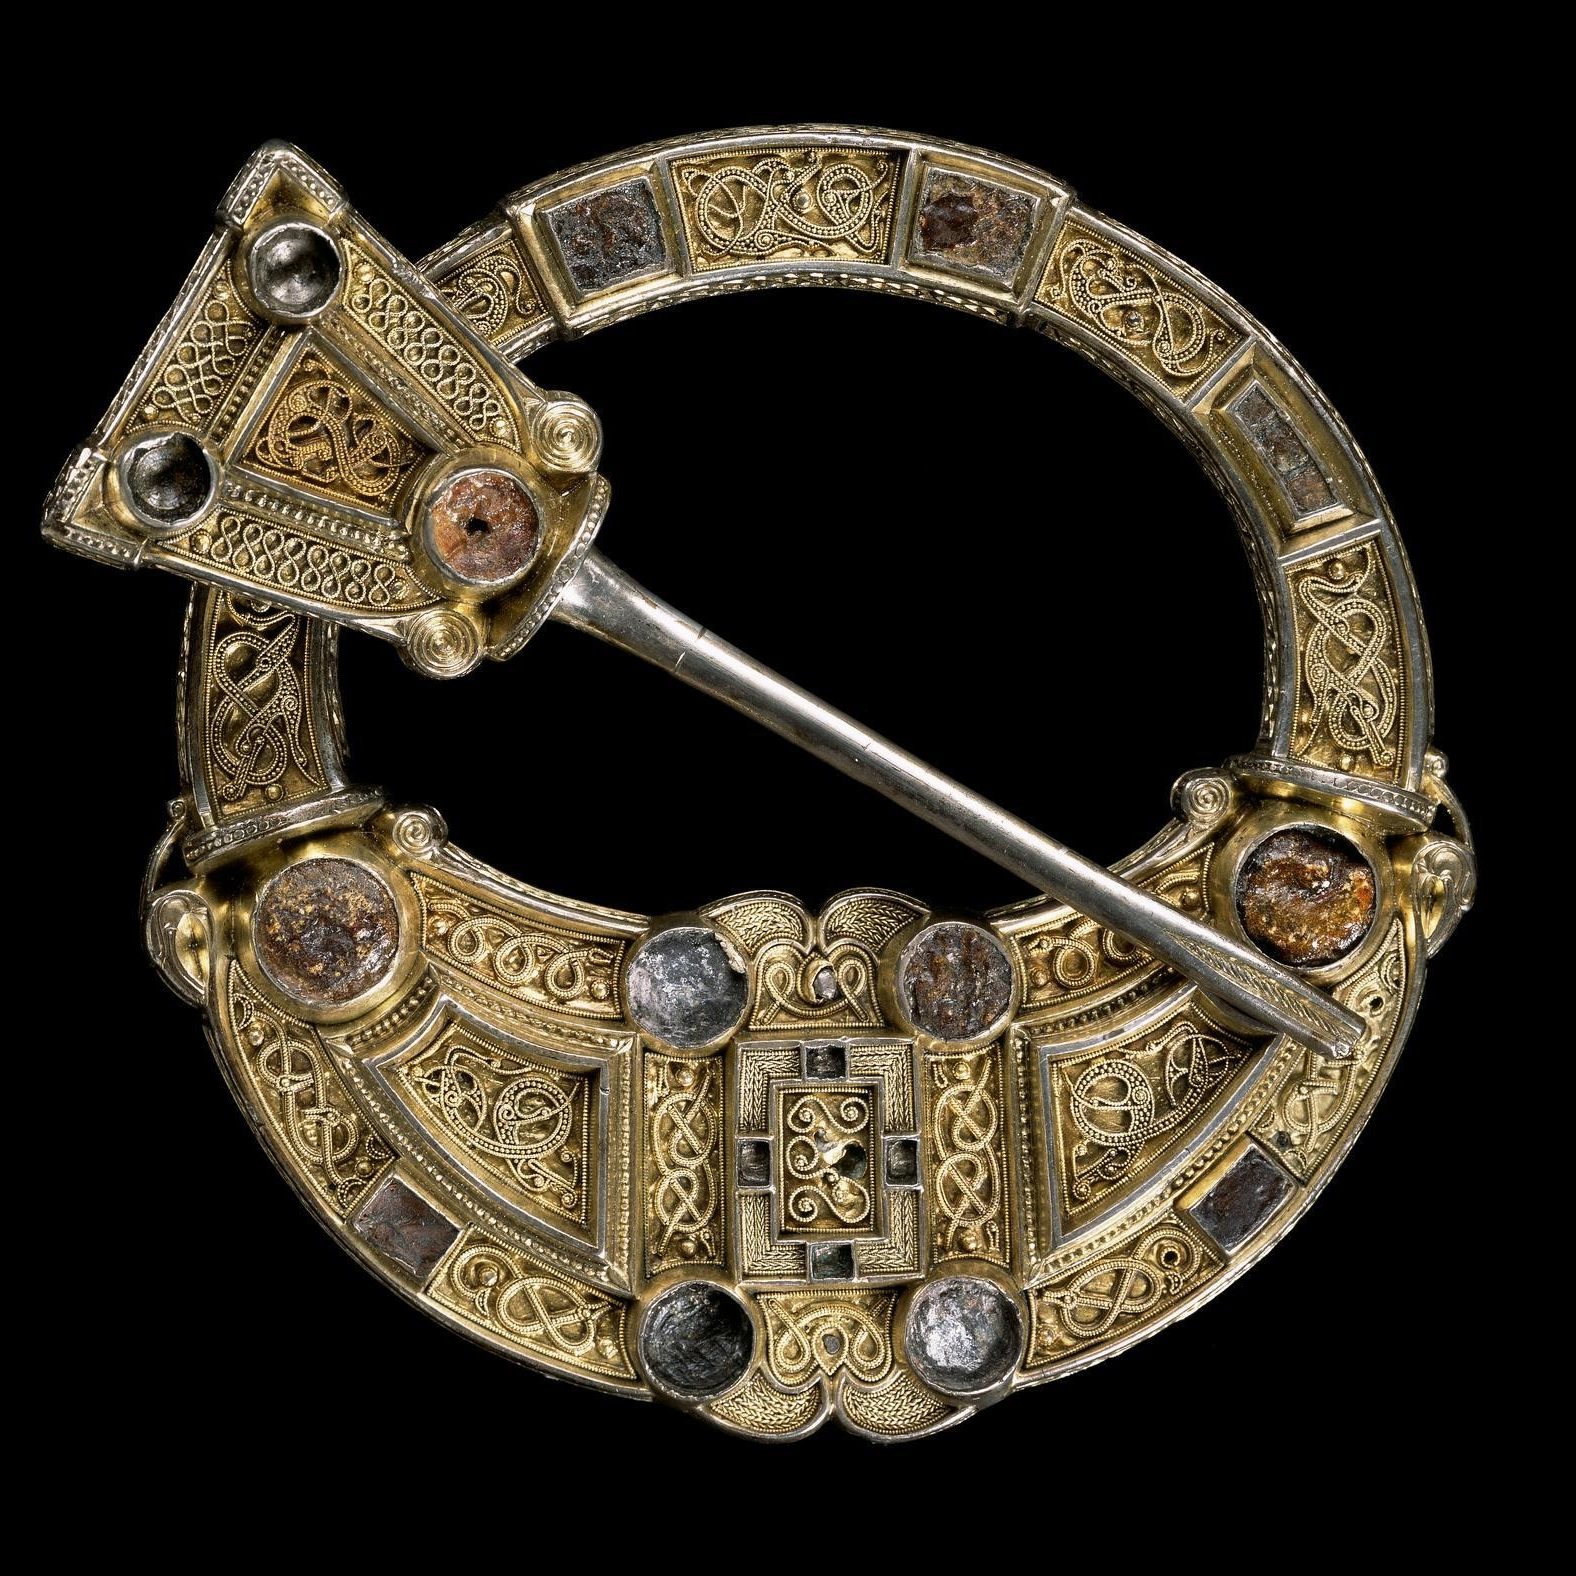 Stunningly ornate gold brooch, circular with a hollow top half and quill-like pin cutting diagonally across. Dense knot patterns and gemstone fittings cover its whole surface.